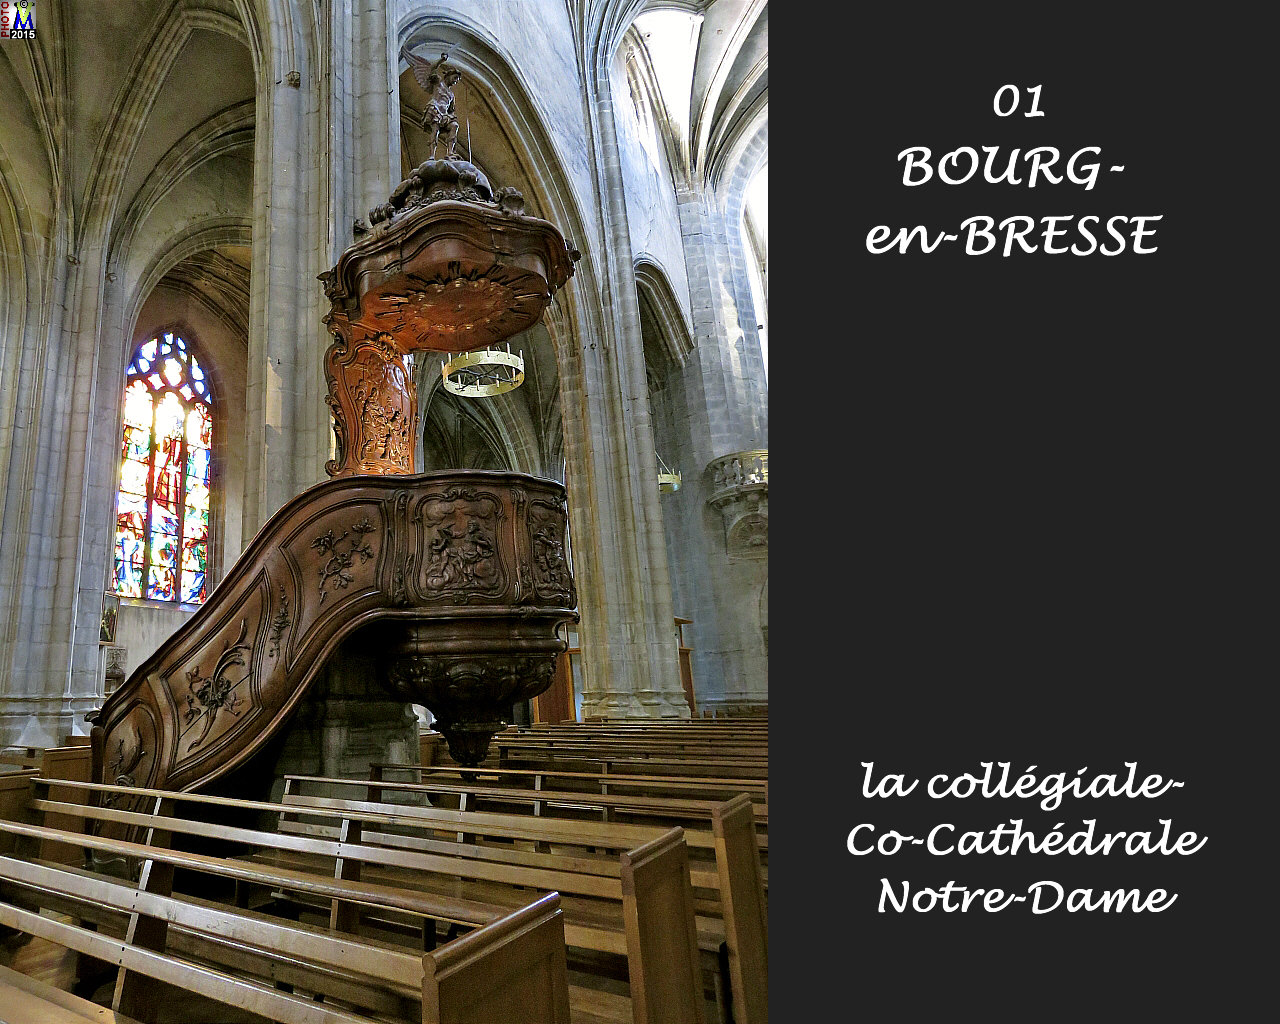 01BOURG-BRESSE_cathedrale_290.jpg